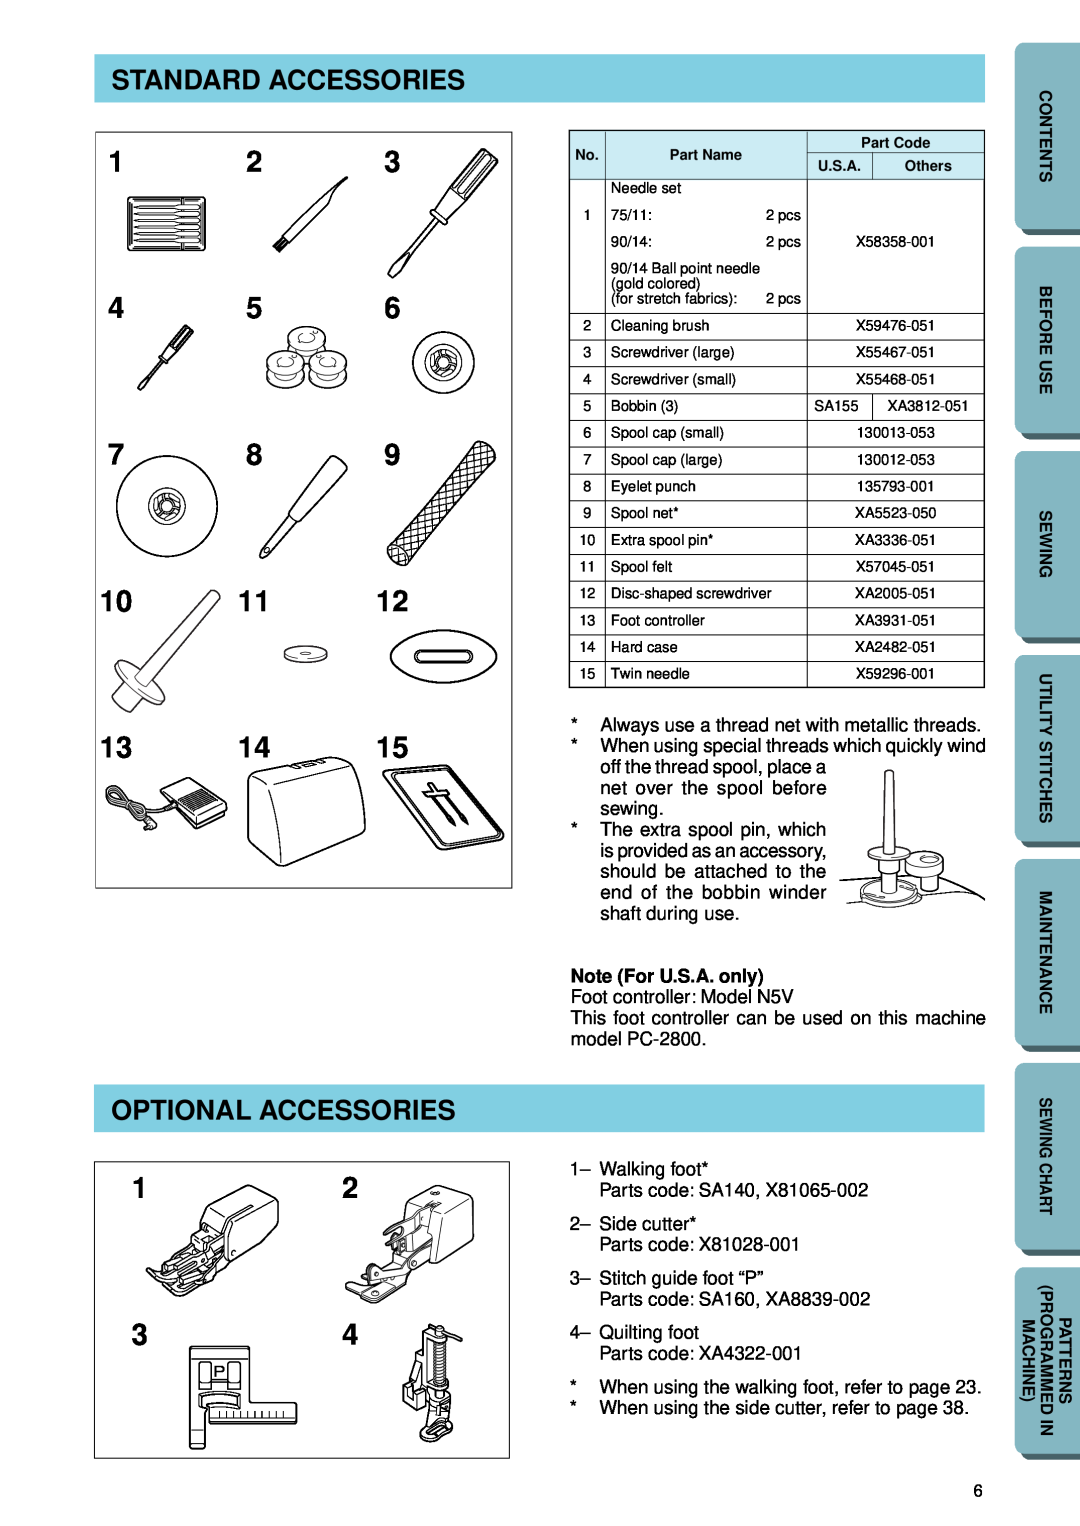 Brother PC-2800 operation manual Standard Accessories, Optional Accessories, Note For U.S.A. only Foot controller Model N5V 